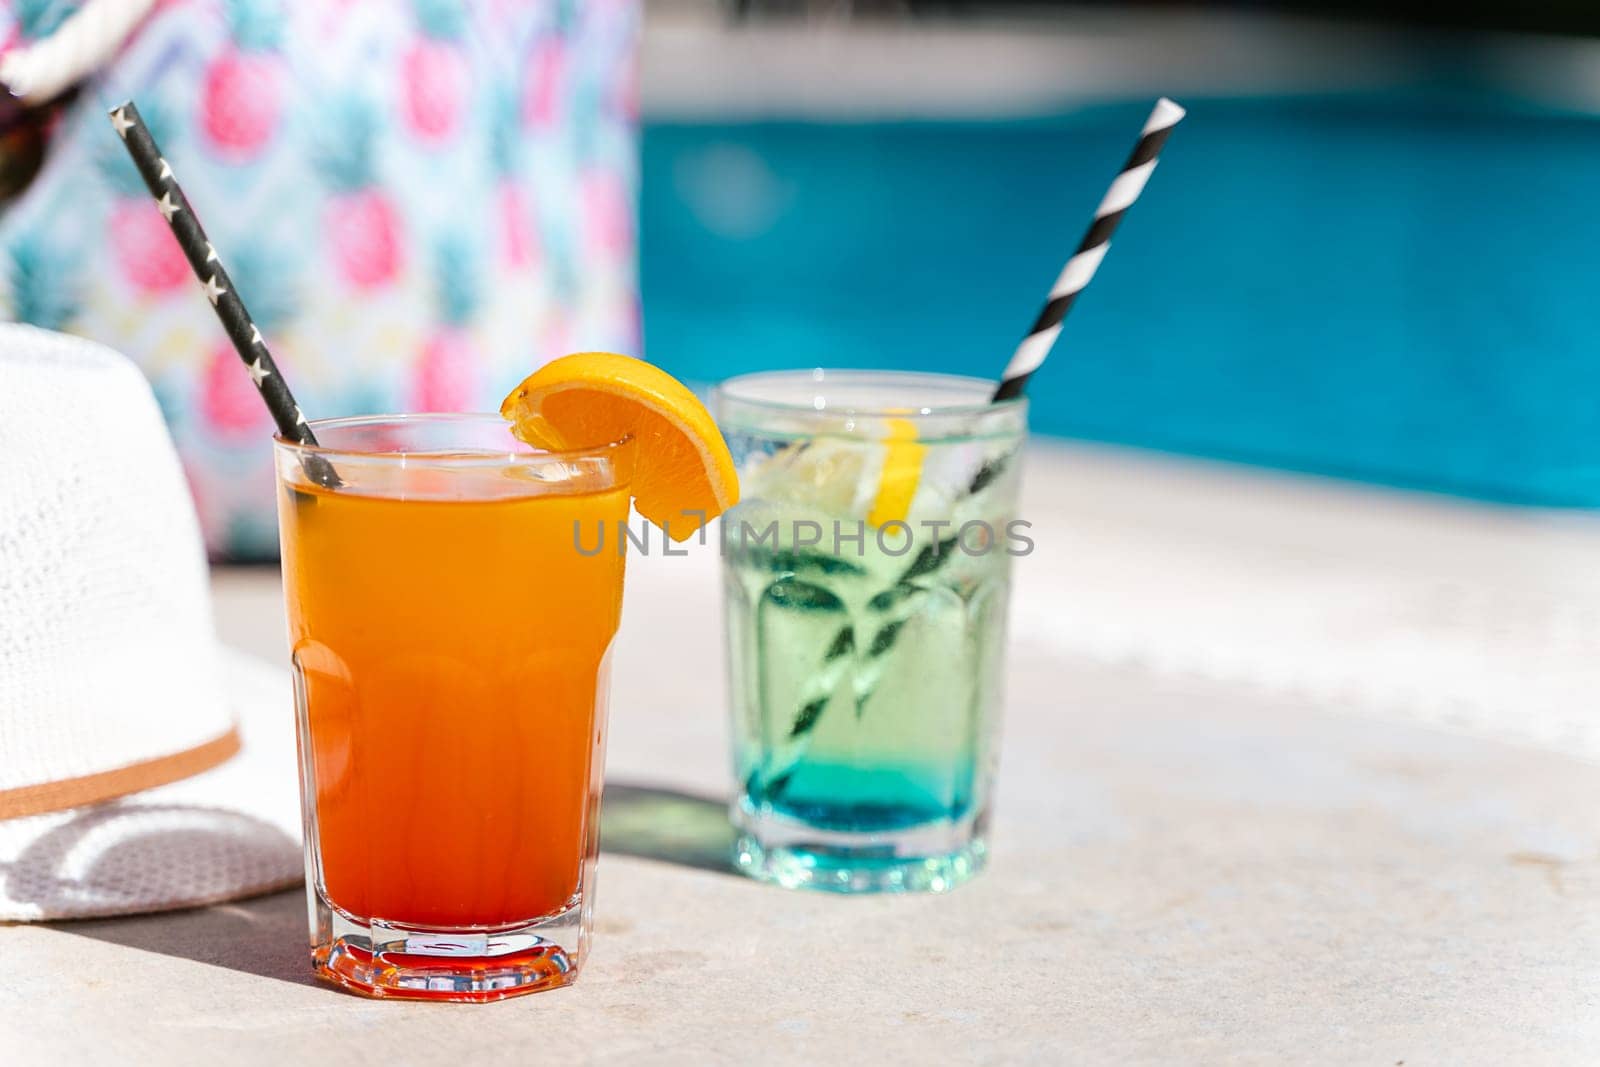 Tropical sparkling lemonade cocktails by the pool with pink beach bag and white hat in the background. Picture of glasses with orange and mint lemon fruit cocktails. Hello summer holiday vacation.